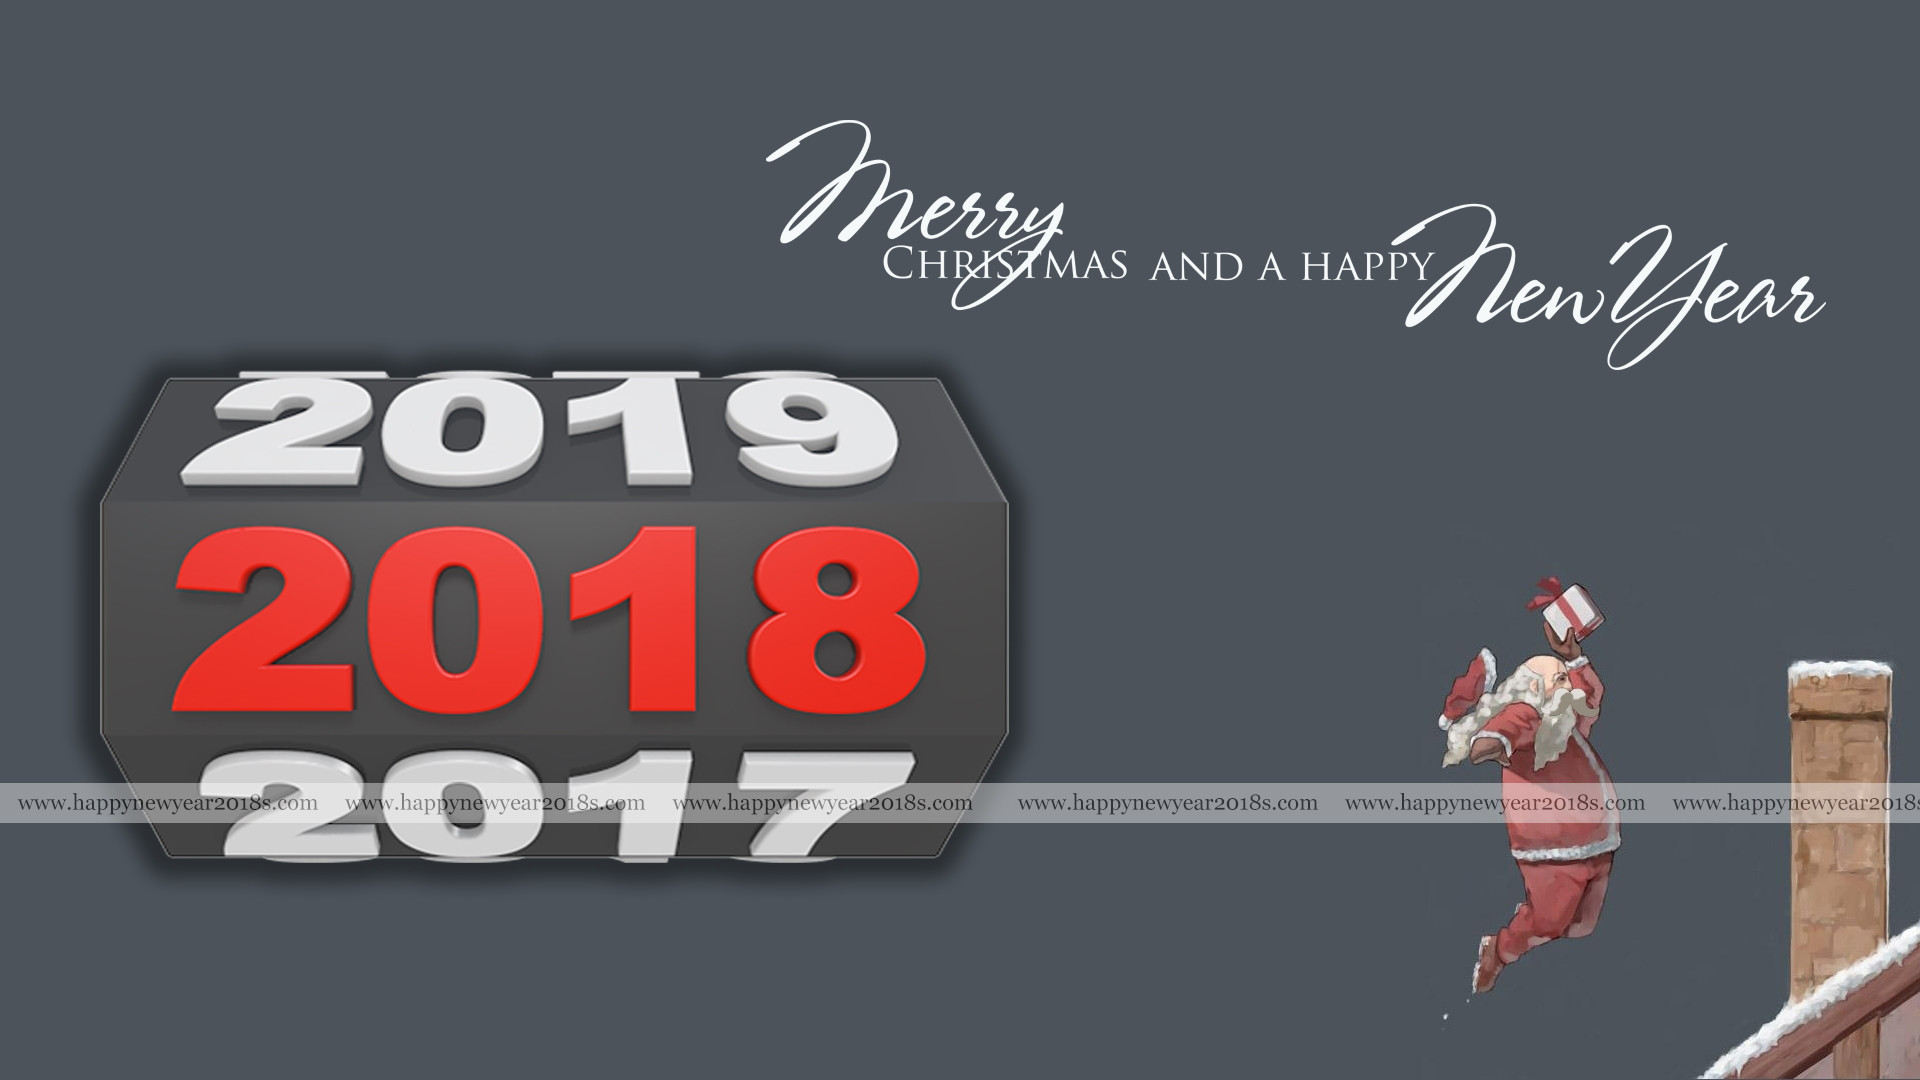 1920x1080 ... Pictures Happy New Year 2018 HD Wallpaper, Images, ...